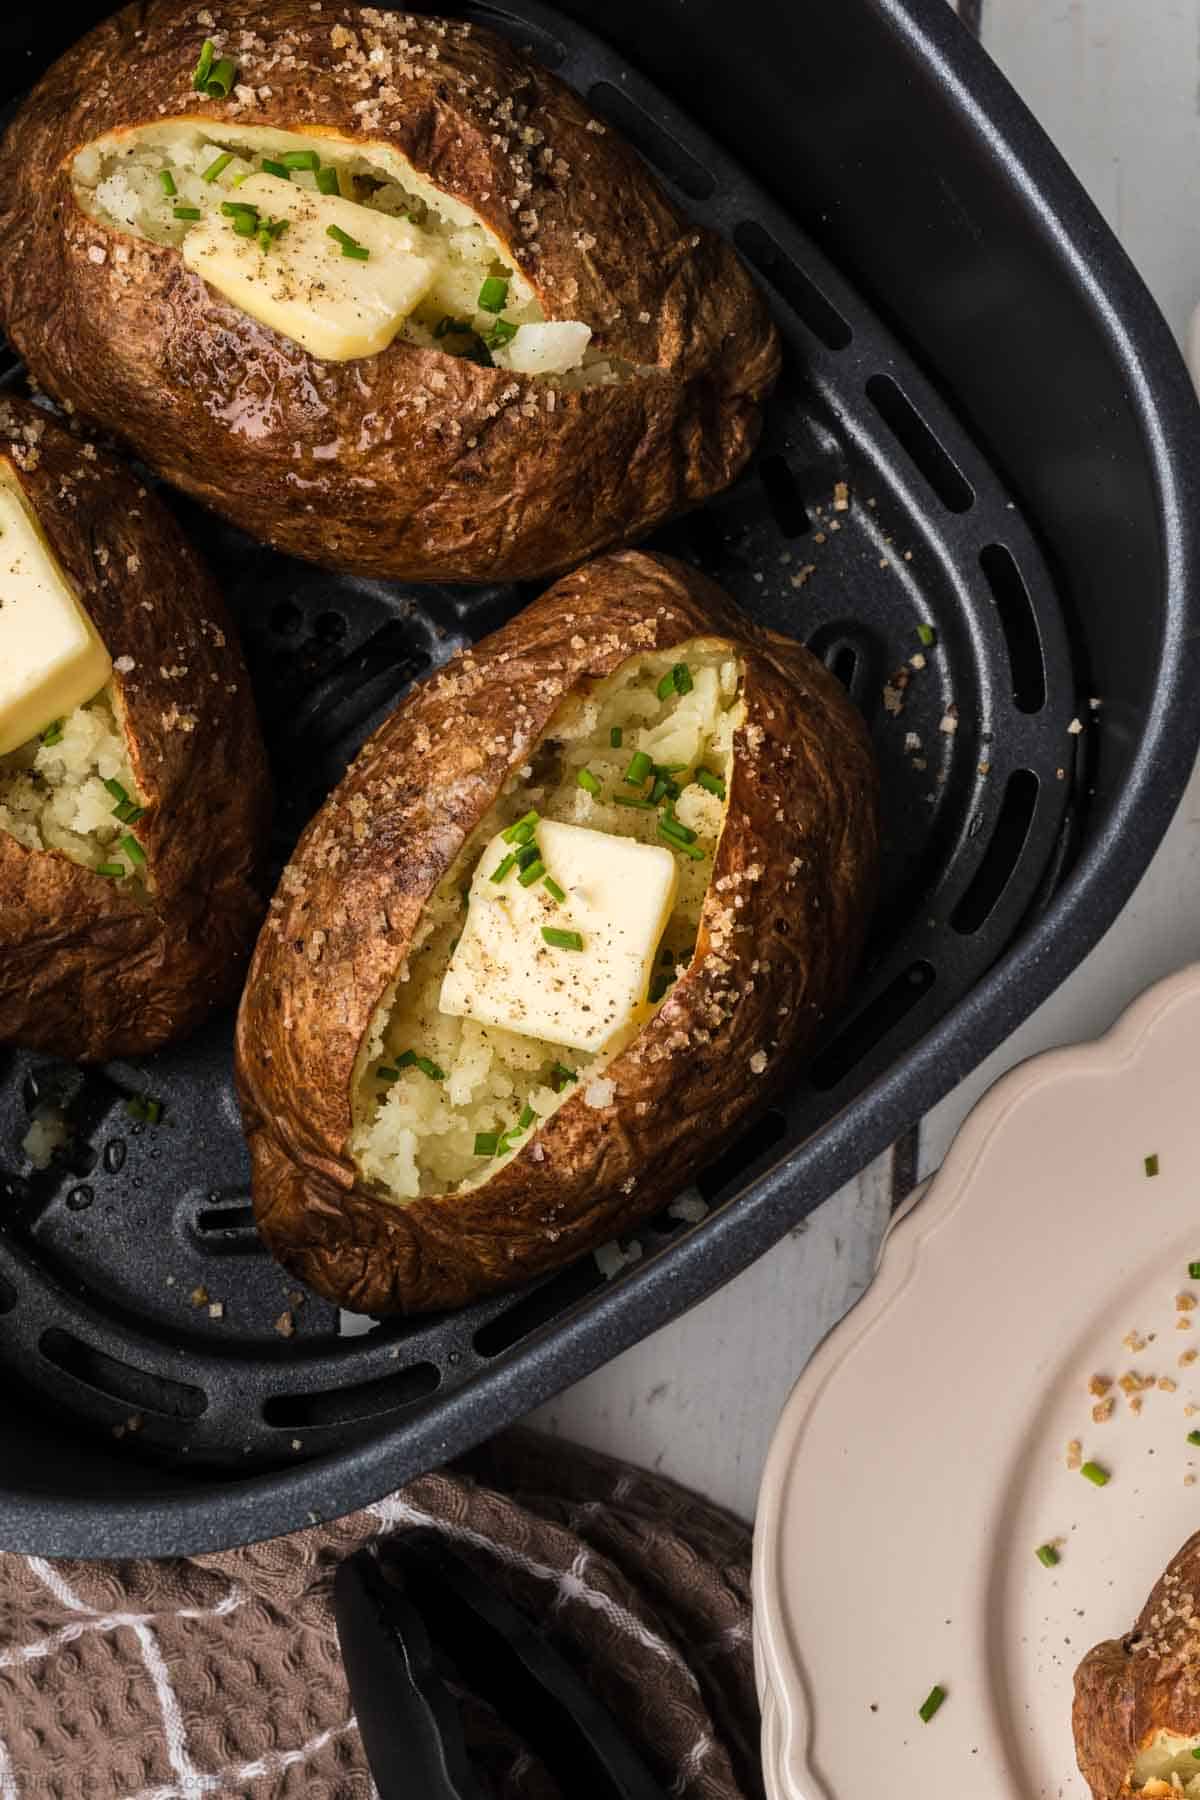 Three air fryer baked potatoes are shown, each sliced open with a pat of butter melting inside. Chopped chives are sprinkled as a garnish. A beige plate is partially visible in the background, while a brown towel rests near the air fryer basket.